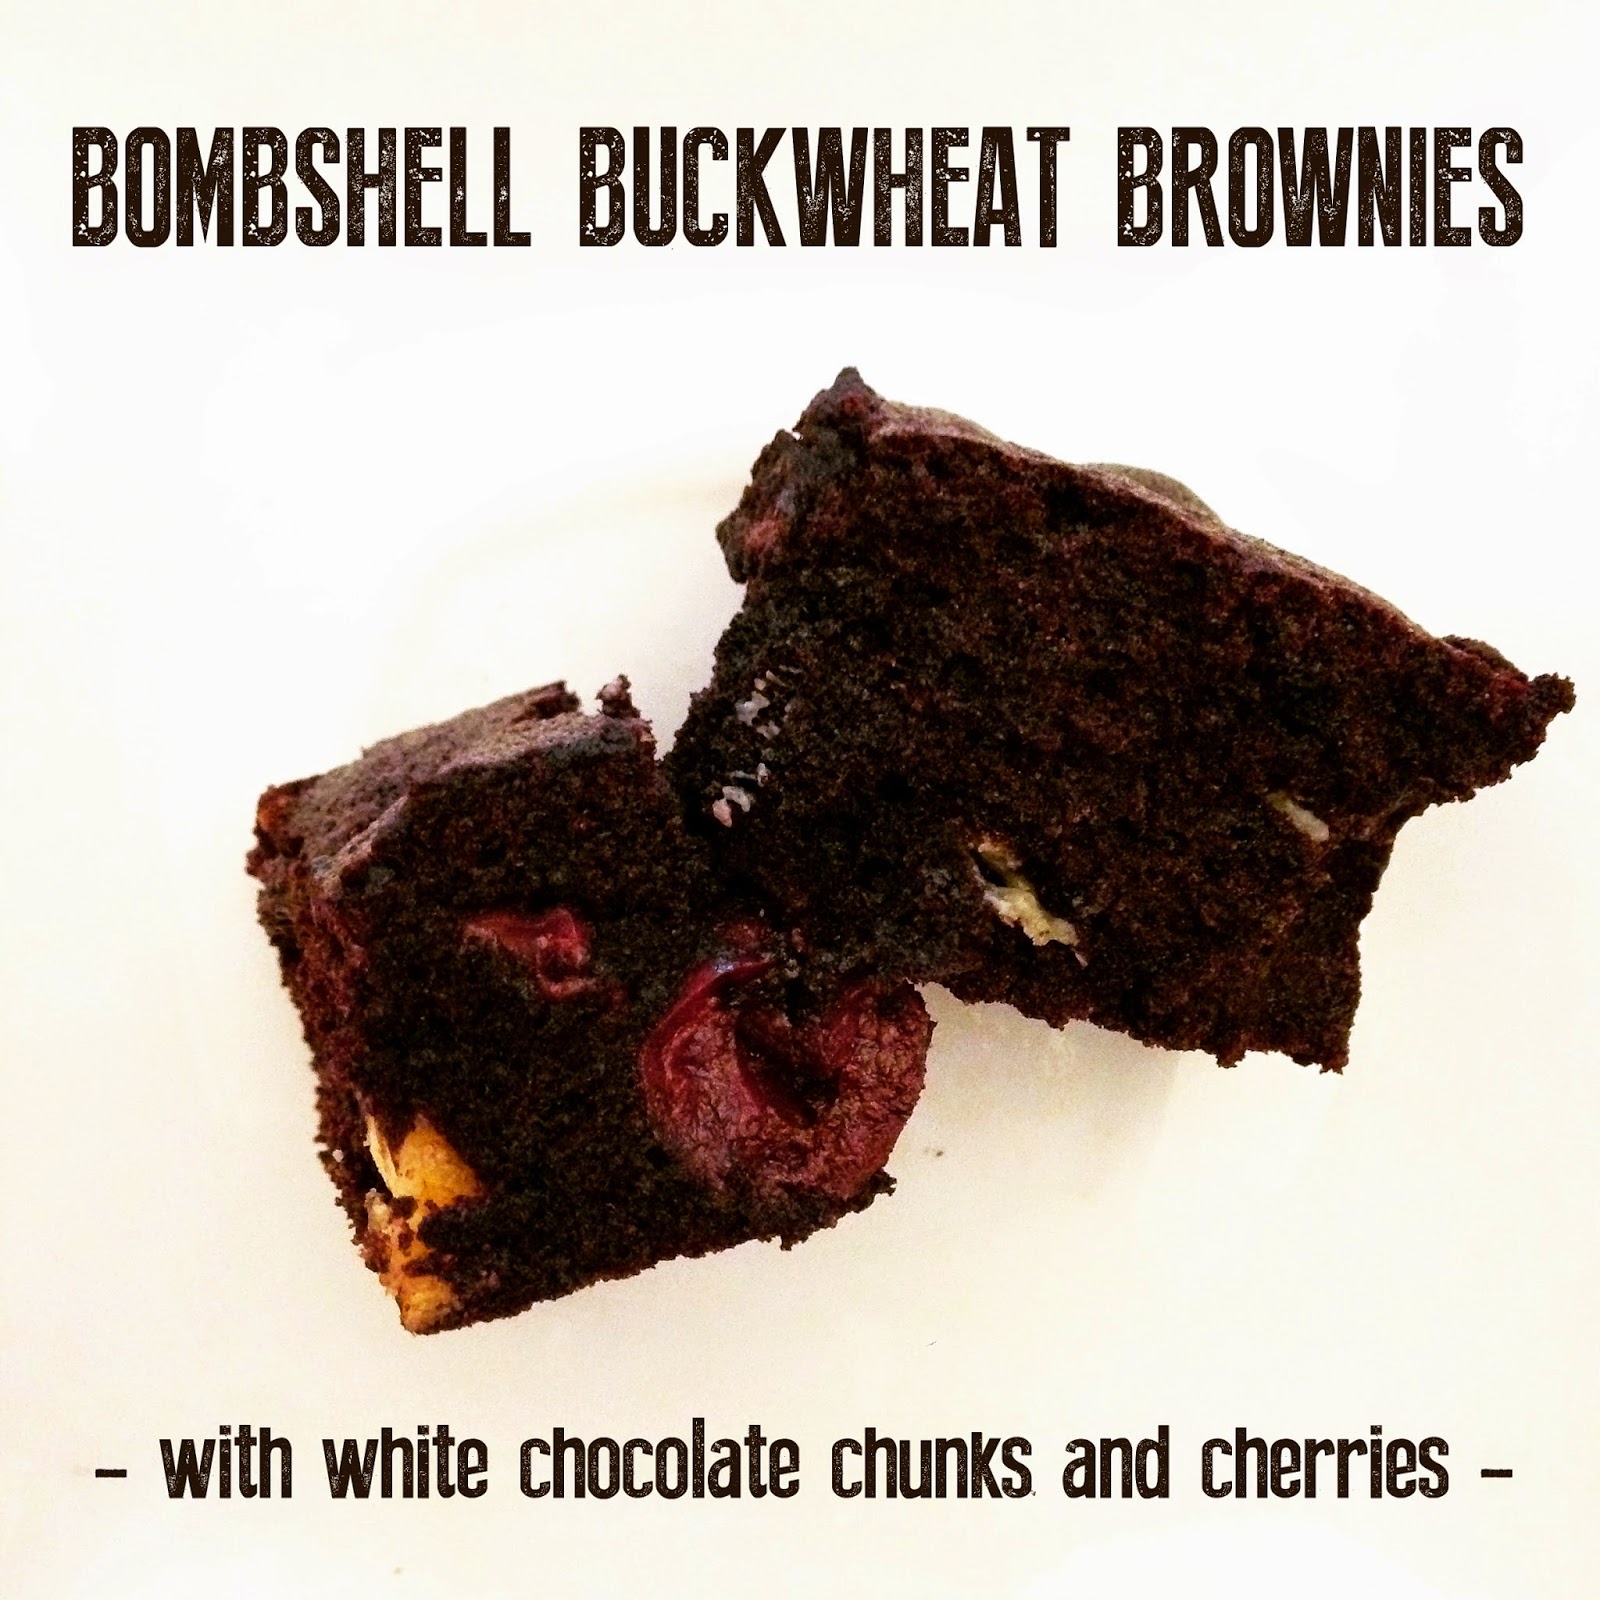 (no fuss, no muss) delicious and moist gluten-free brownies. { moist buckwheat brownies with cherries and white chocolate chunks }